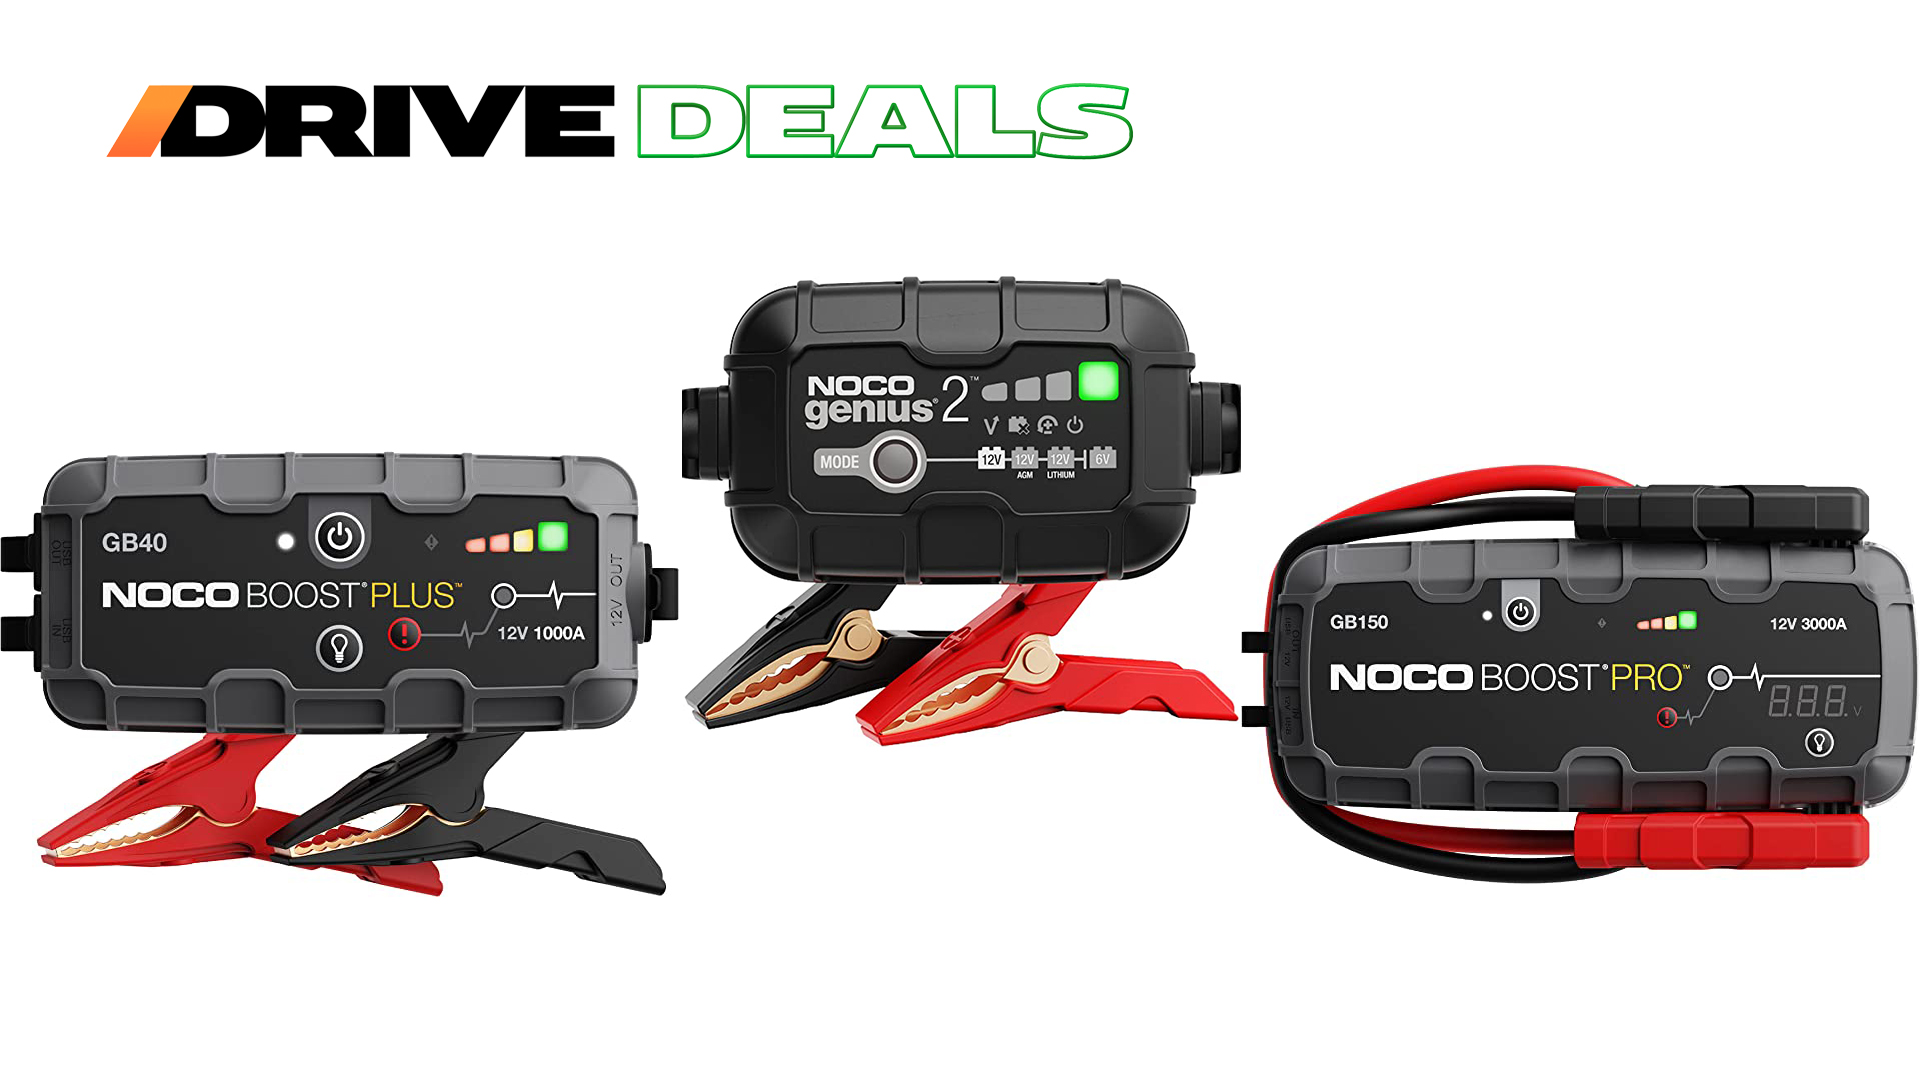 There's No Reason Not to Take Advantage of These NOCO Deals